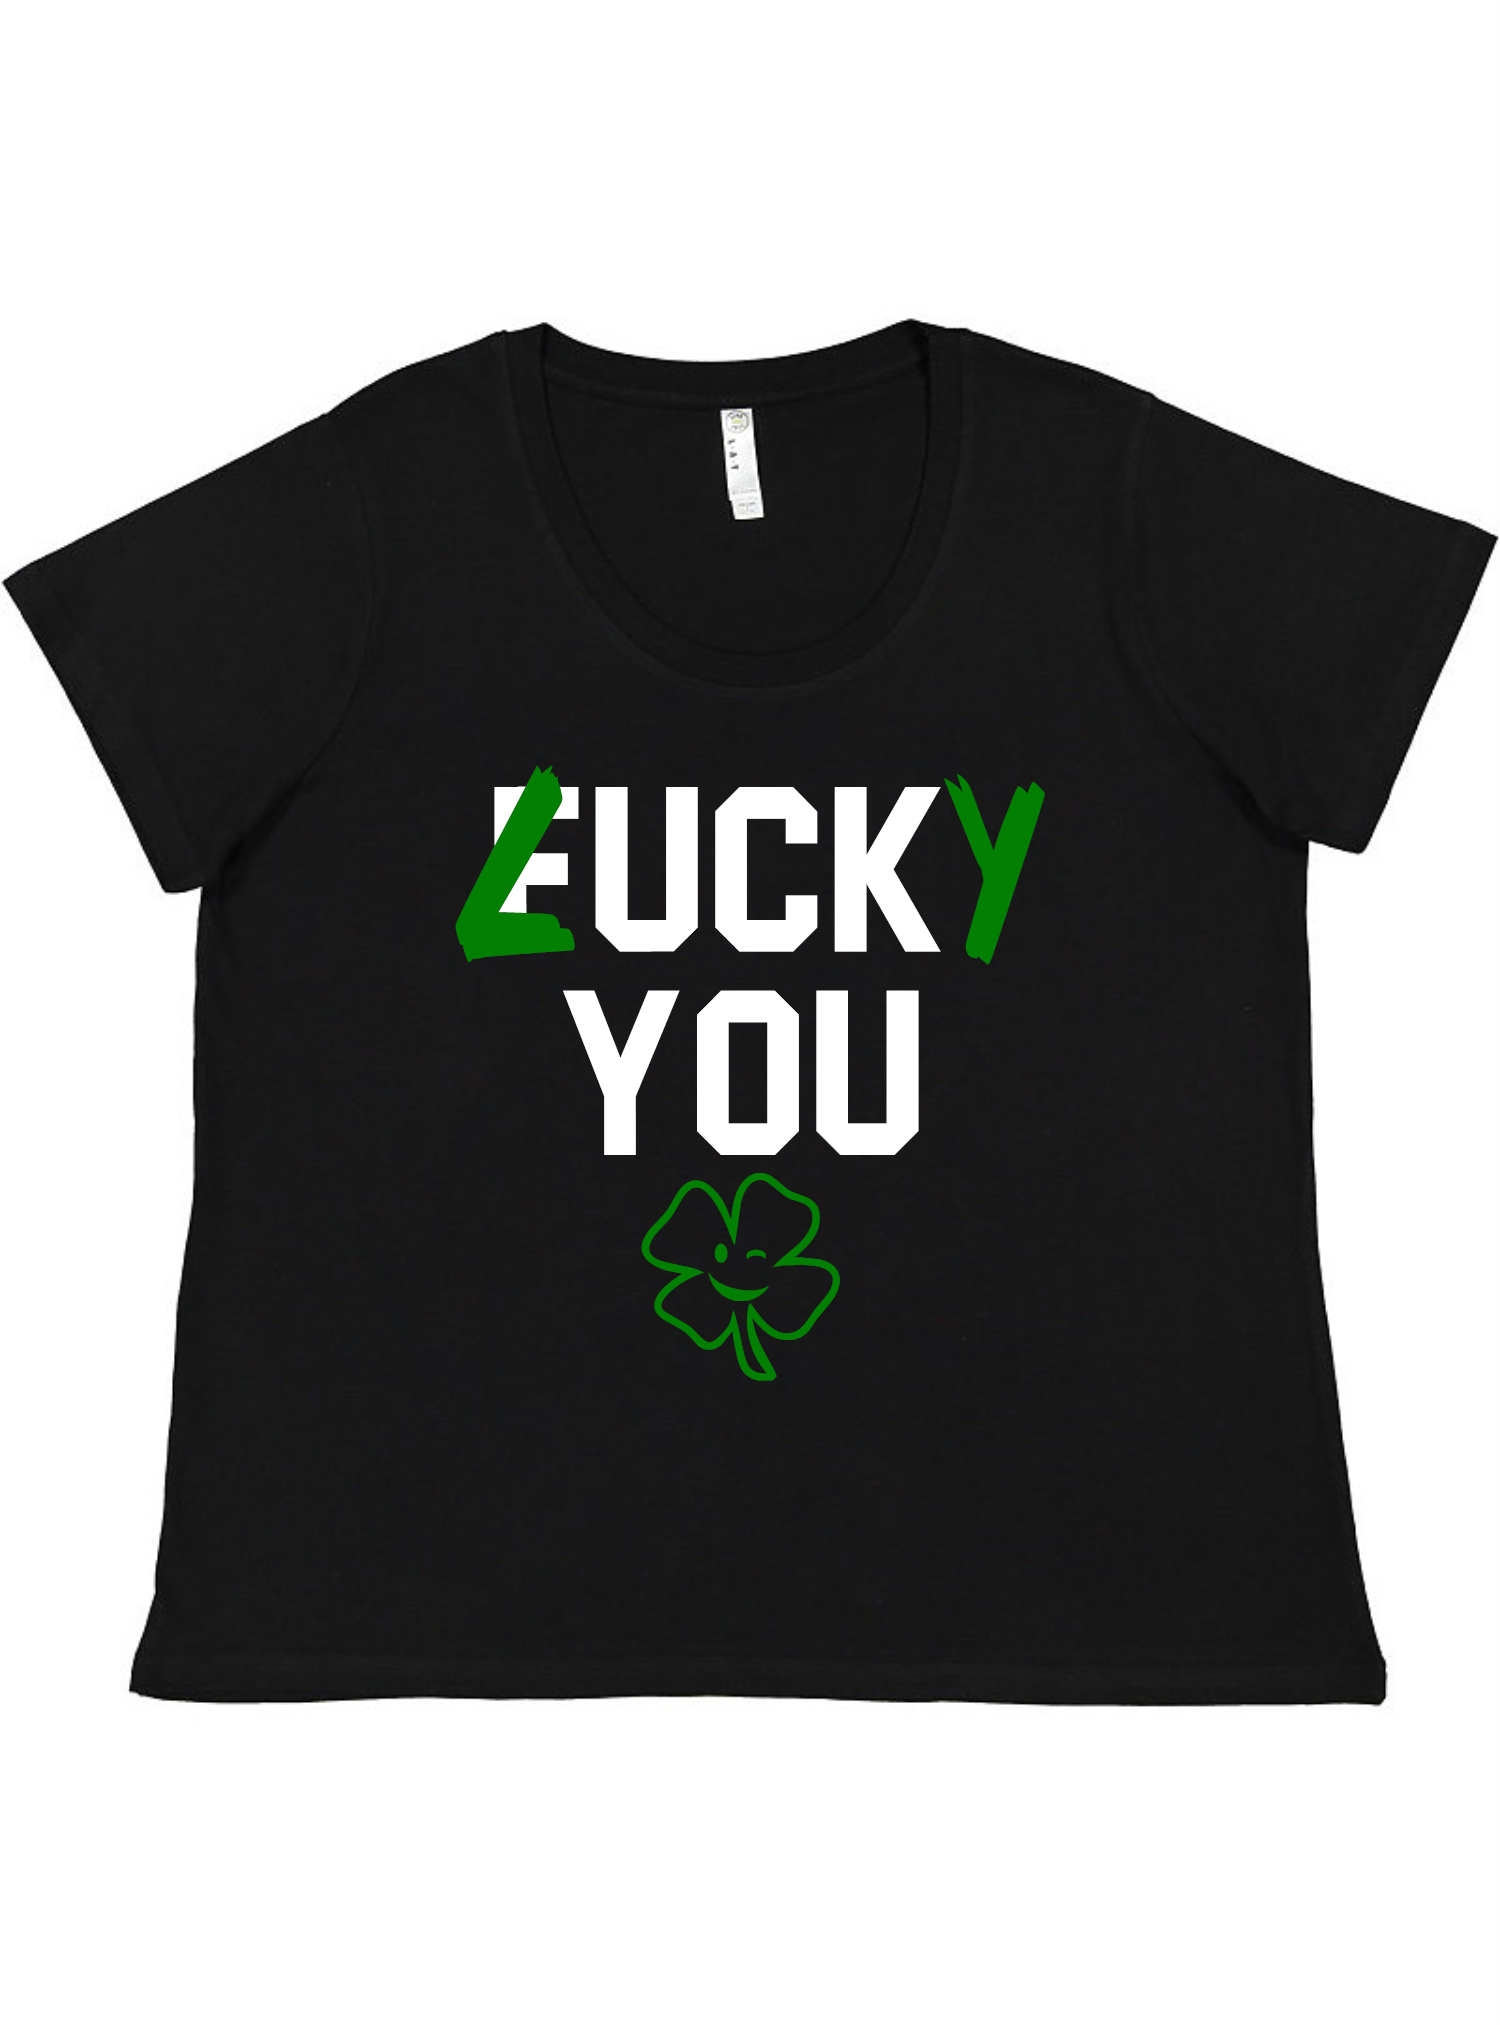 Lucky You Ladies Tee Ladies Shirt by Akron Pride Custom Tees | Akron Pride Custom Tees